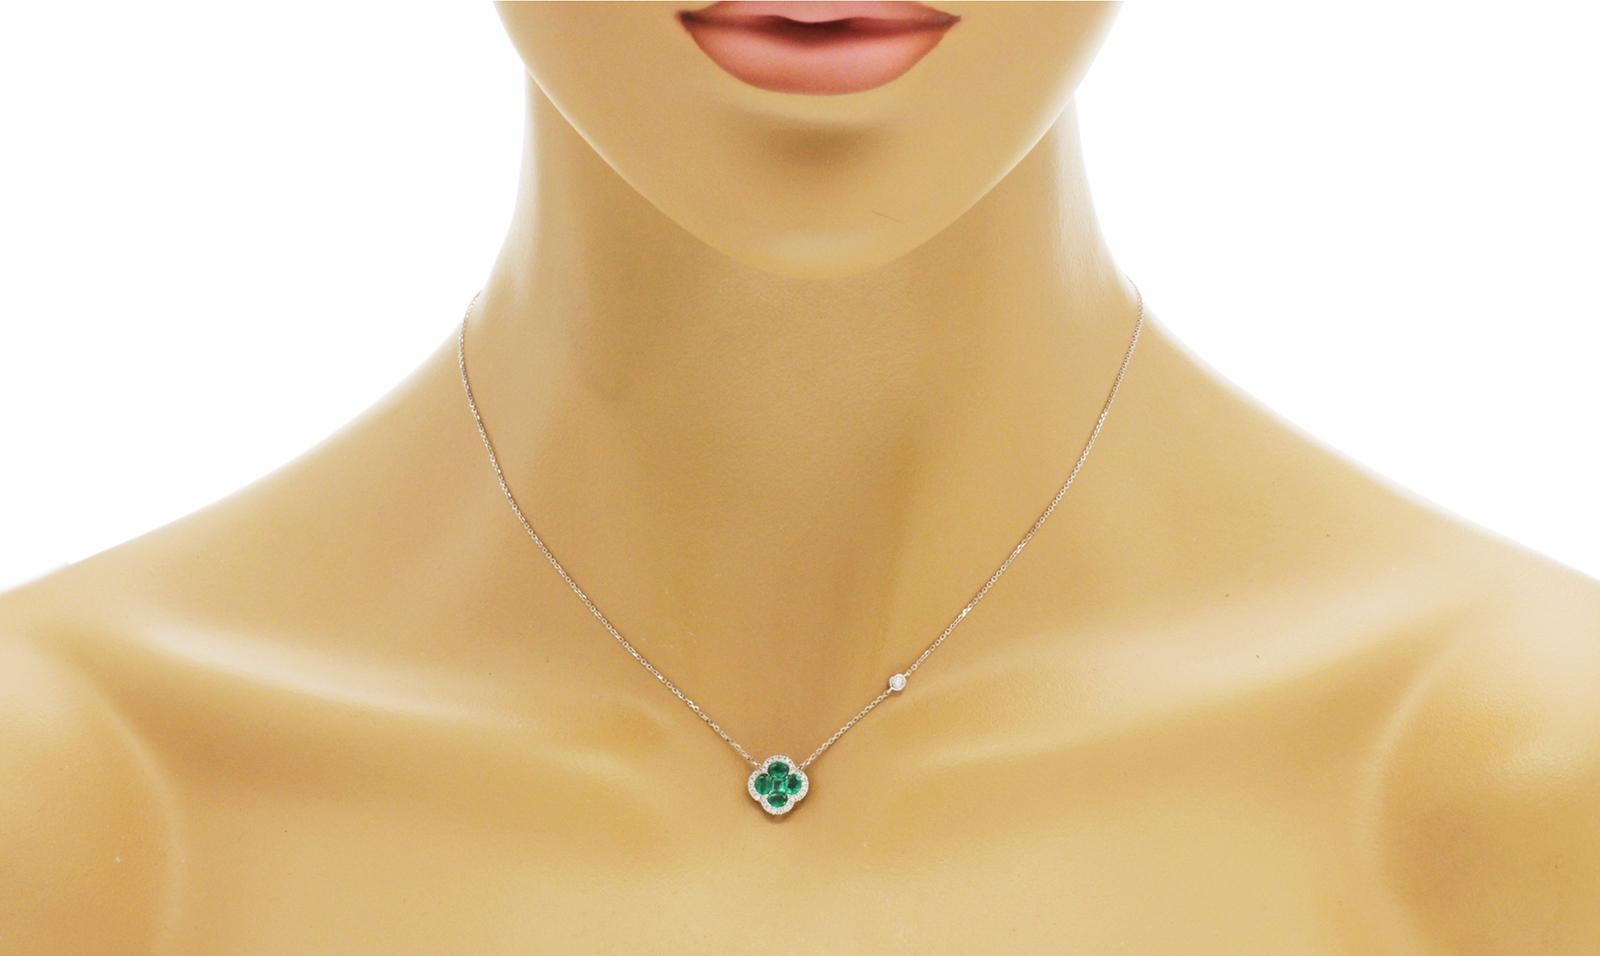 100% Authentic, 100% Customer Satisfaction

Pendant: 10 mm

Chain: 0.5 mm

Size: 16 Inches

Metal: 18K White Gold

Hallmarks: 18K

Total Weight: 2.4 Grams

Stone Type: 0.69 CT Natural HIgh-Quality Emerald &  Diamond 0.28 CT  G   SI1

Condition: New